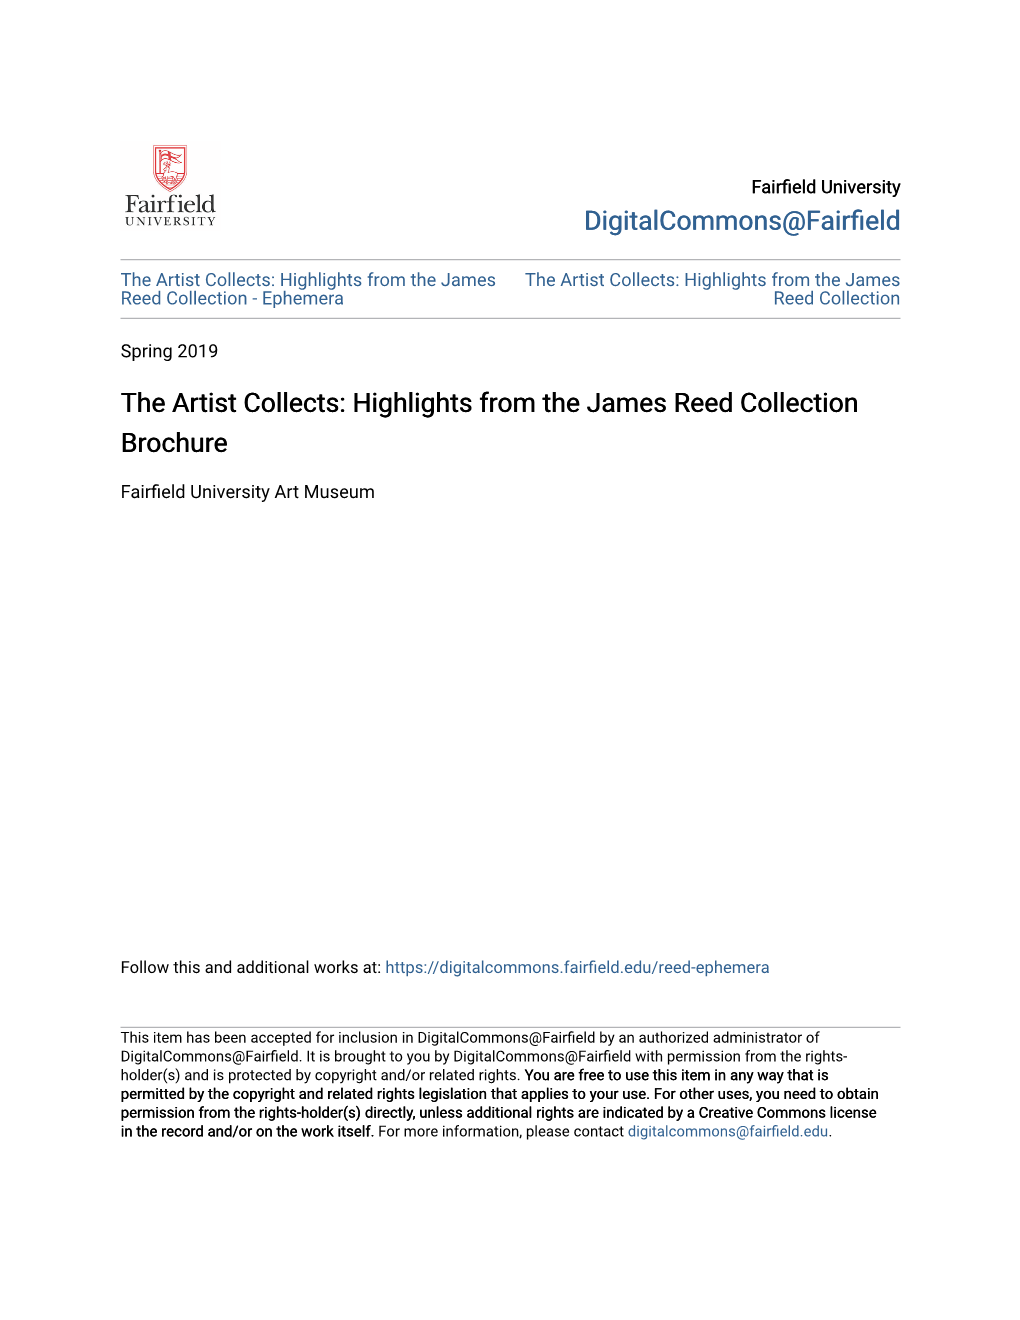 The Artist Collects: Highlights from the James Reed Collection Brochure